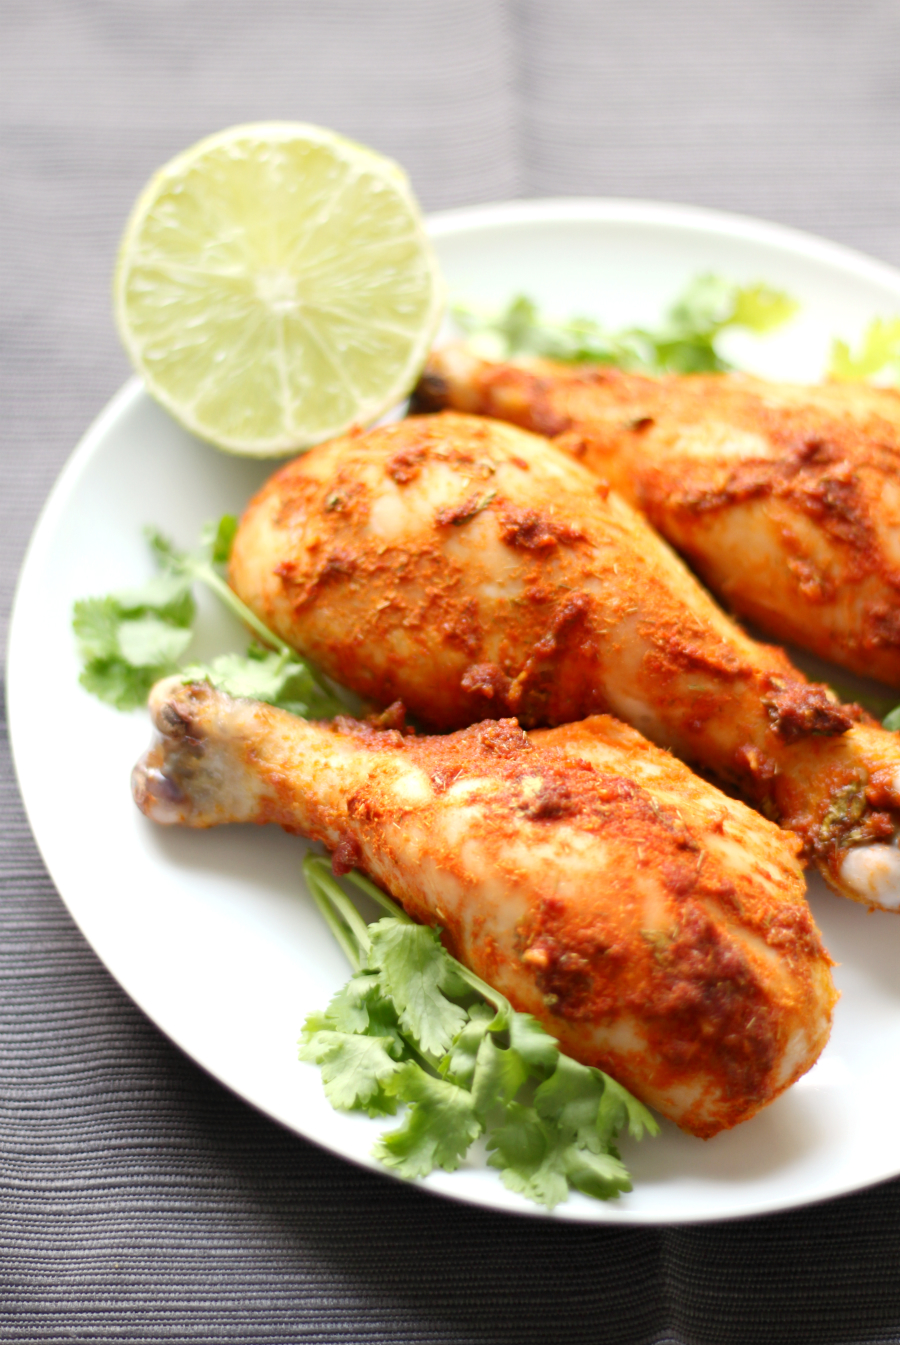 Spicy Thai Red Curry Chicken Drumsticks | Strength and Sunshine @RebeccaGF666 Your best game-day recipe for Spicy Thai Red Curry Chicken Drumsticks! Bring the heat and flavor in a healthy, gluten-free, and paleo way that will keep the crowd cheering for more than just the winning touchdown!